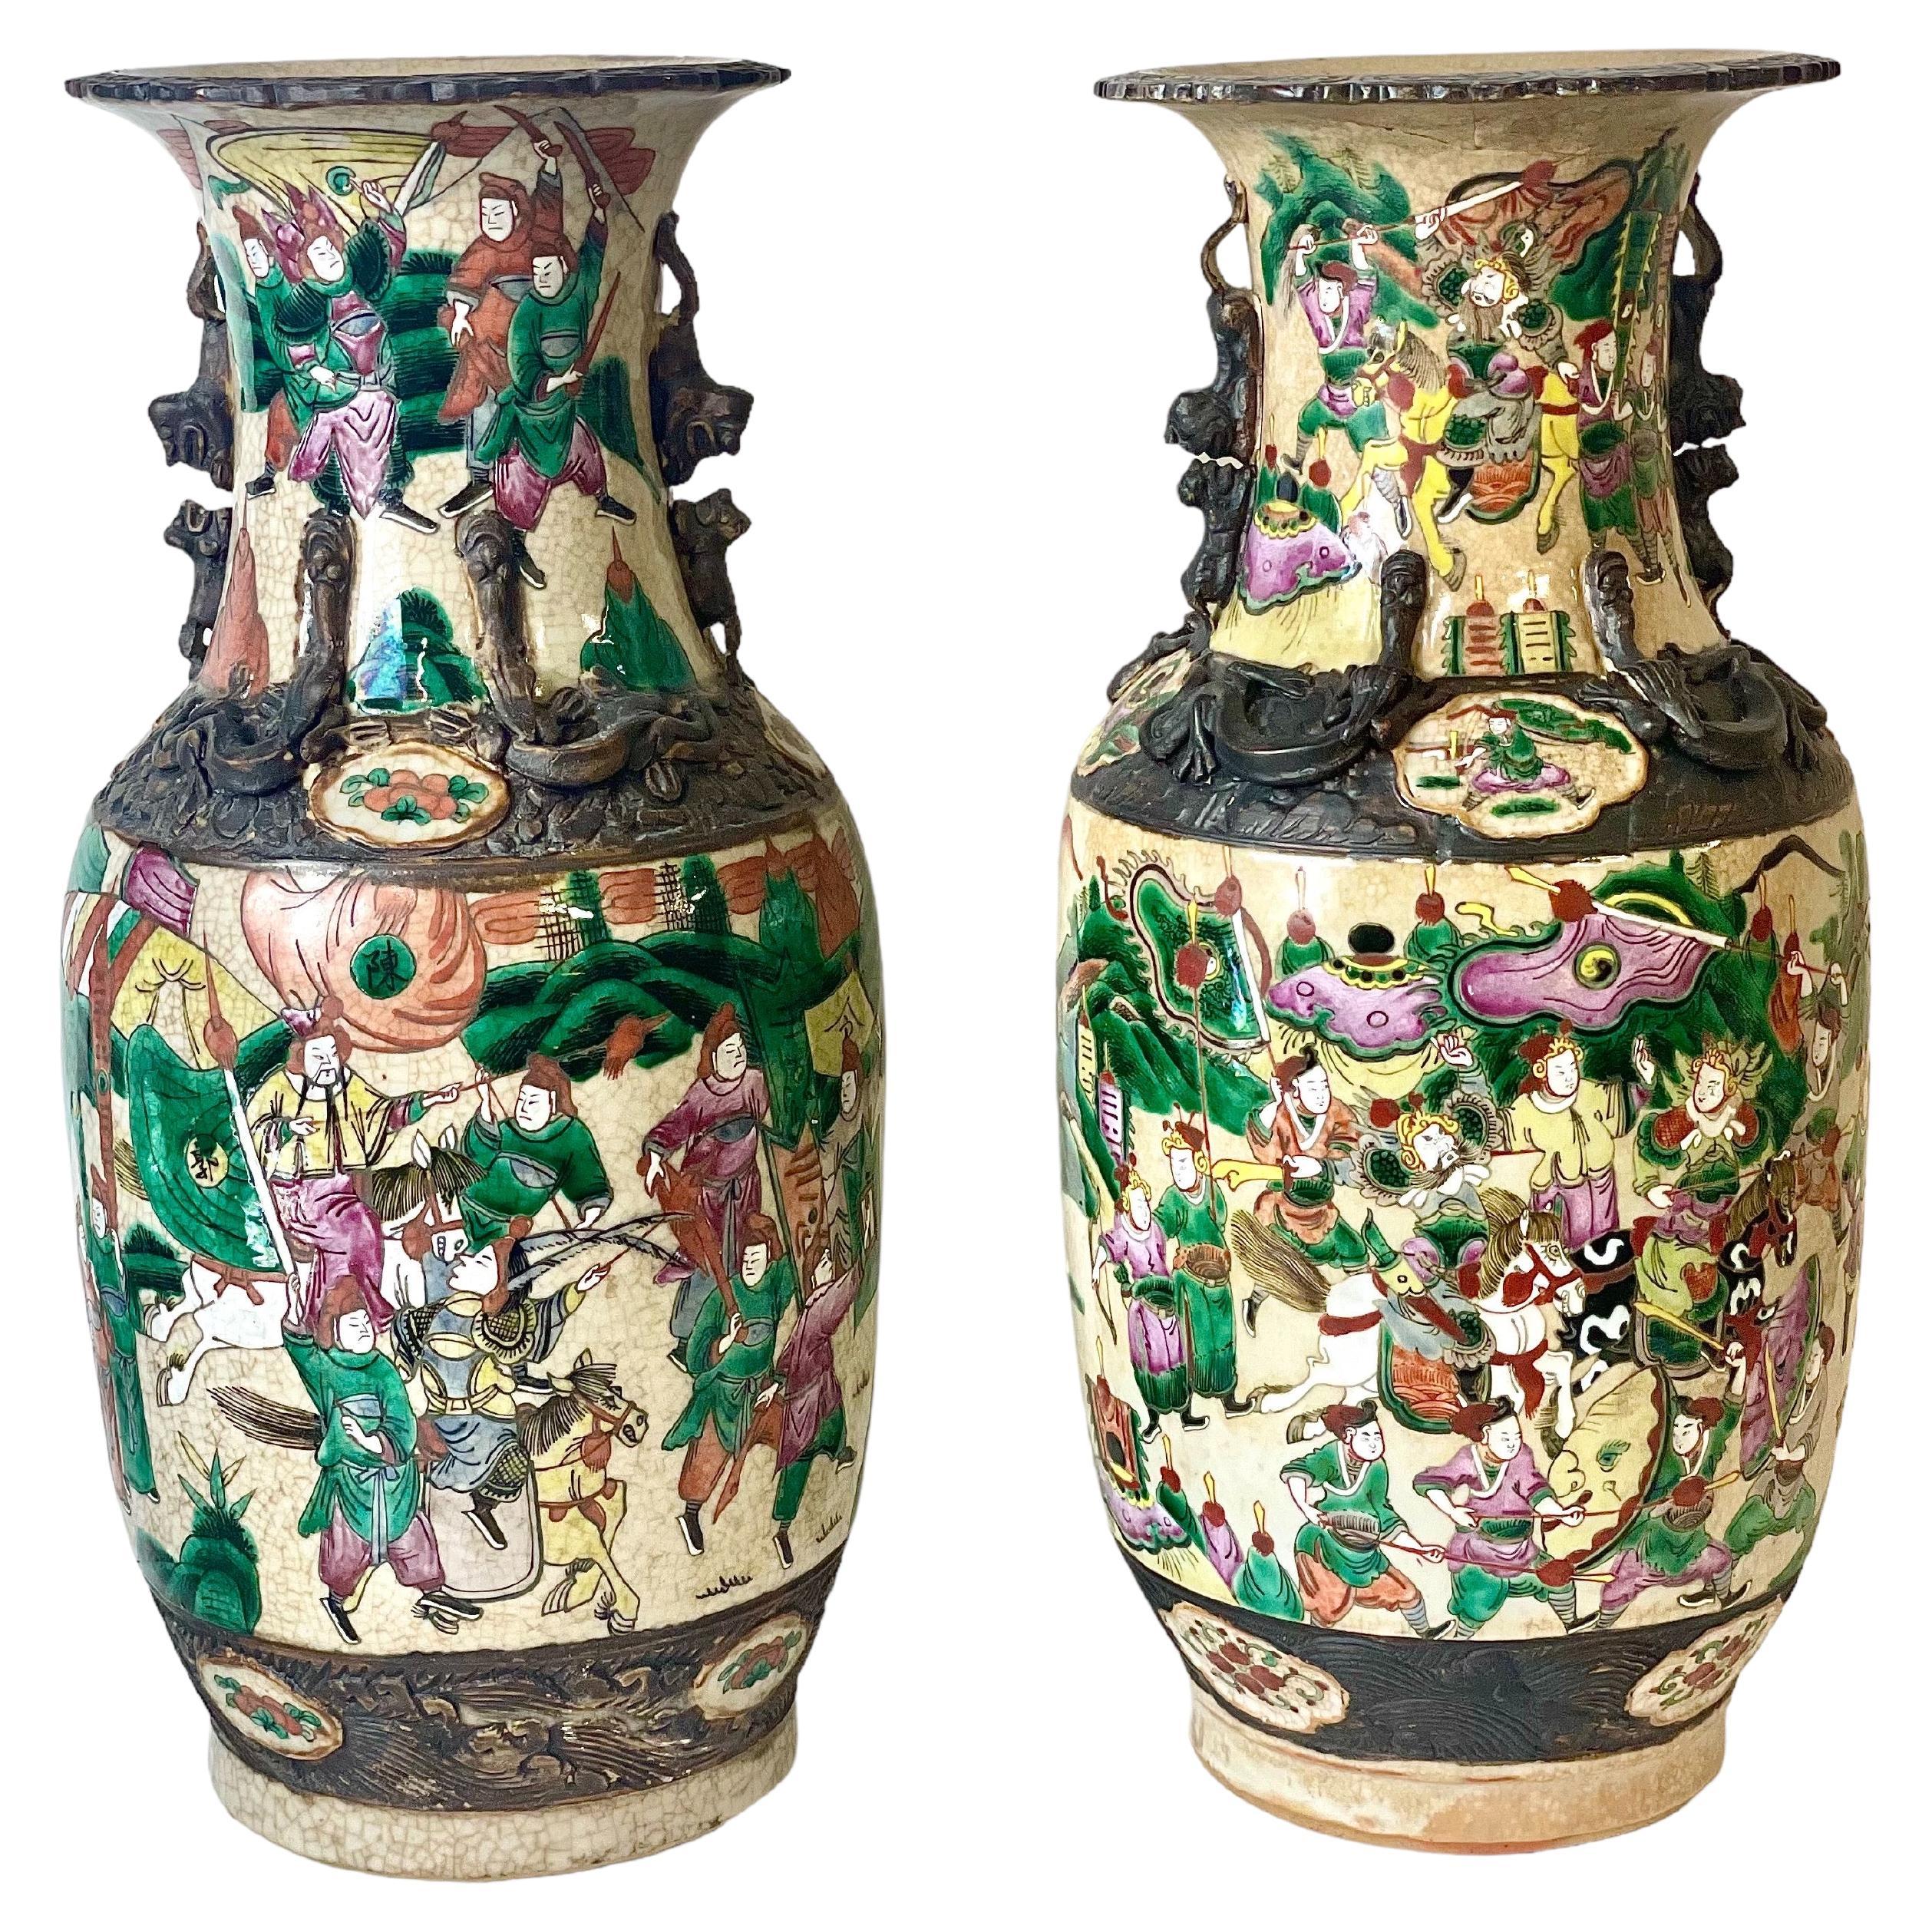 Pair of Chinese Baluster Vases in Nanjing Crackle Glaze